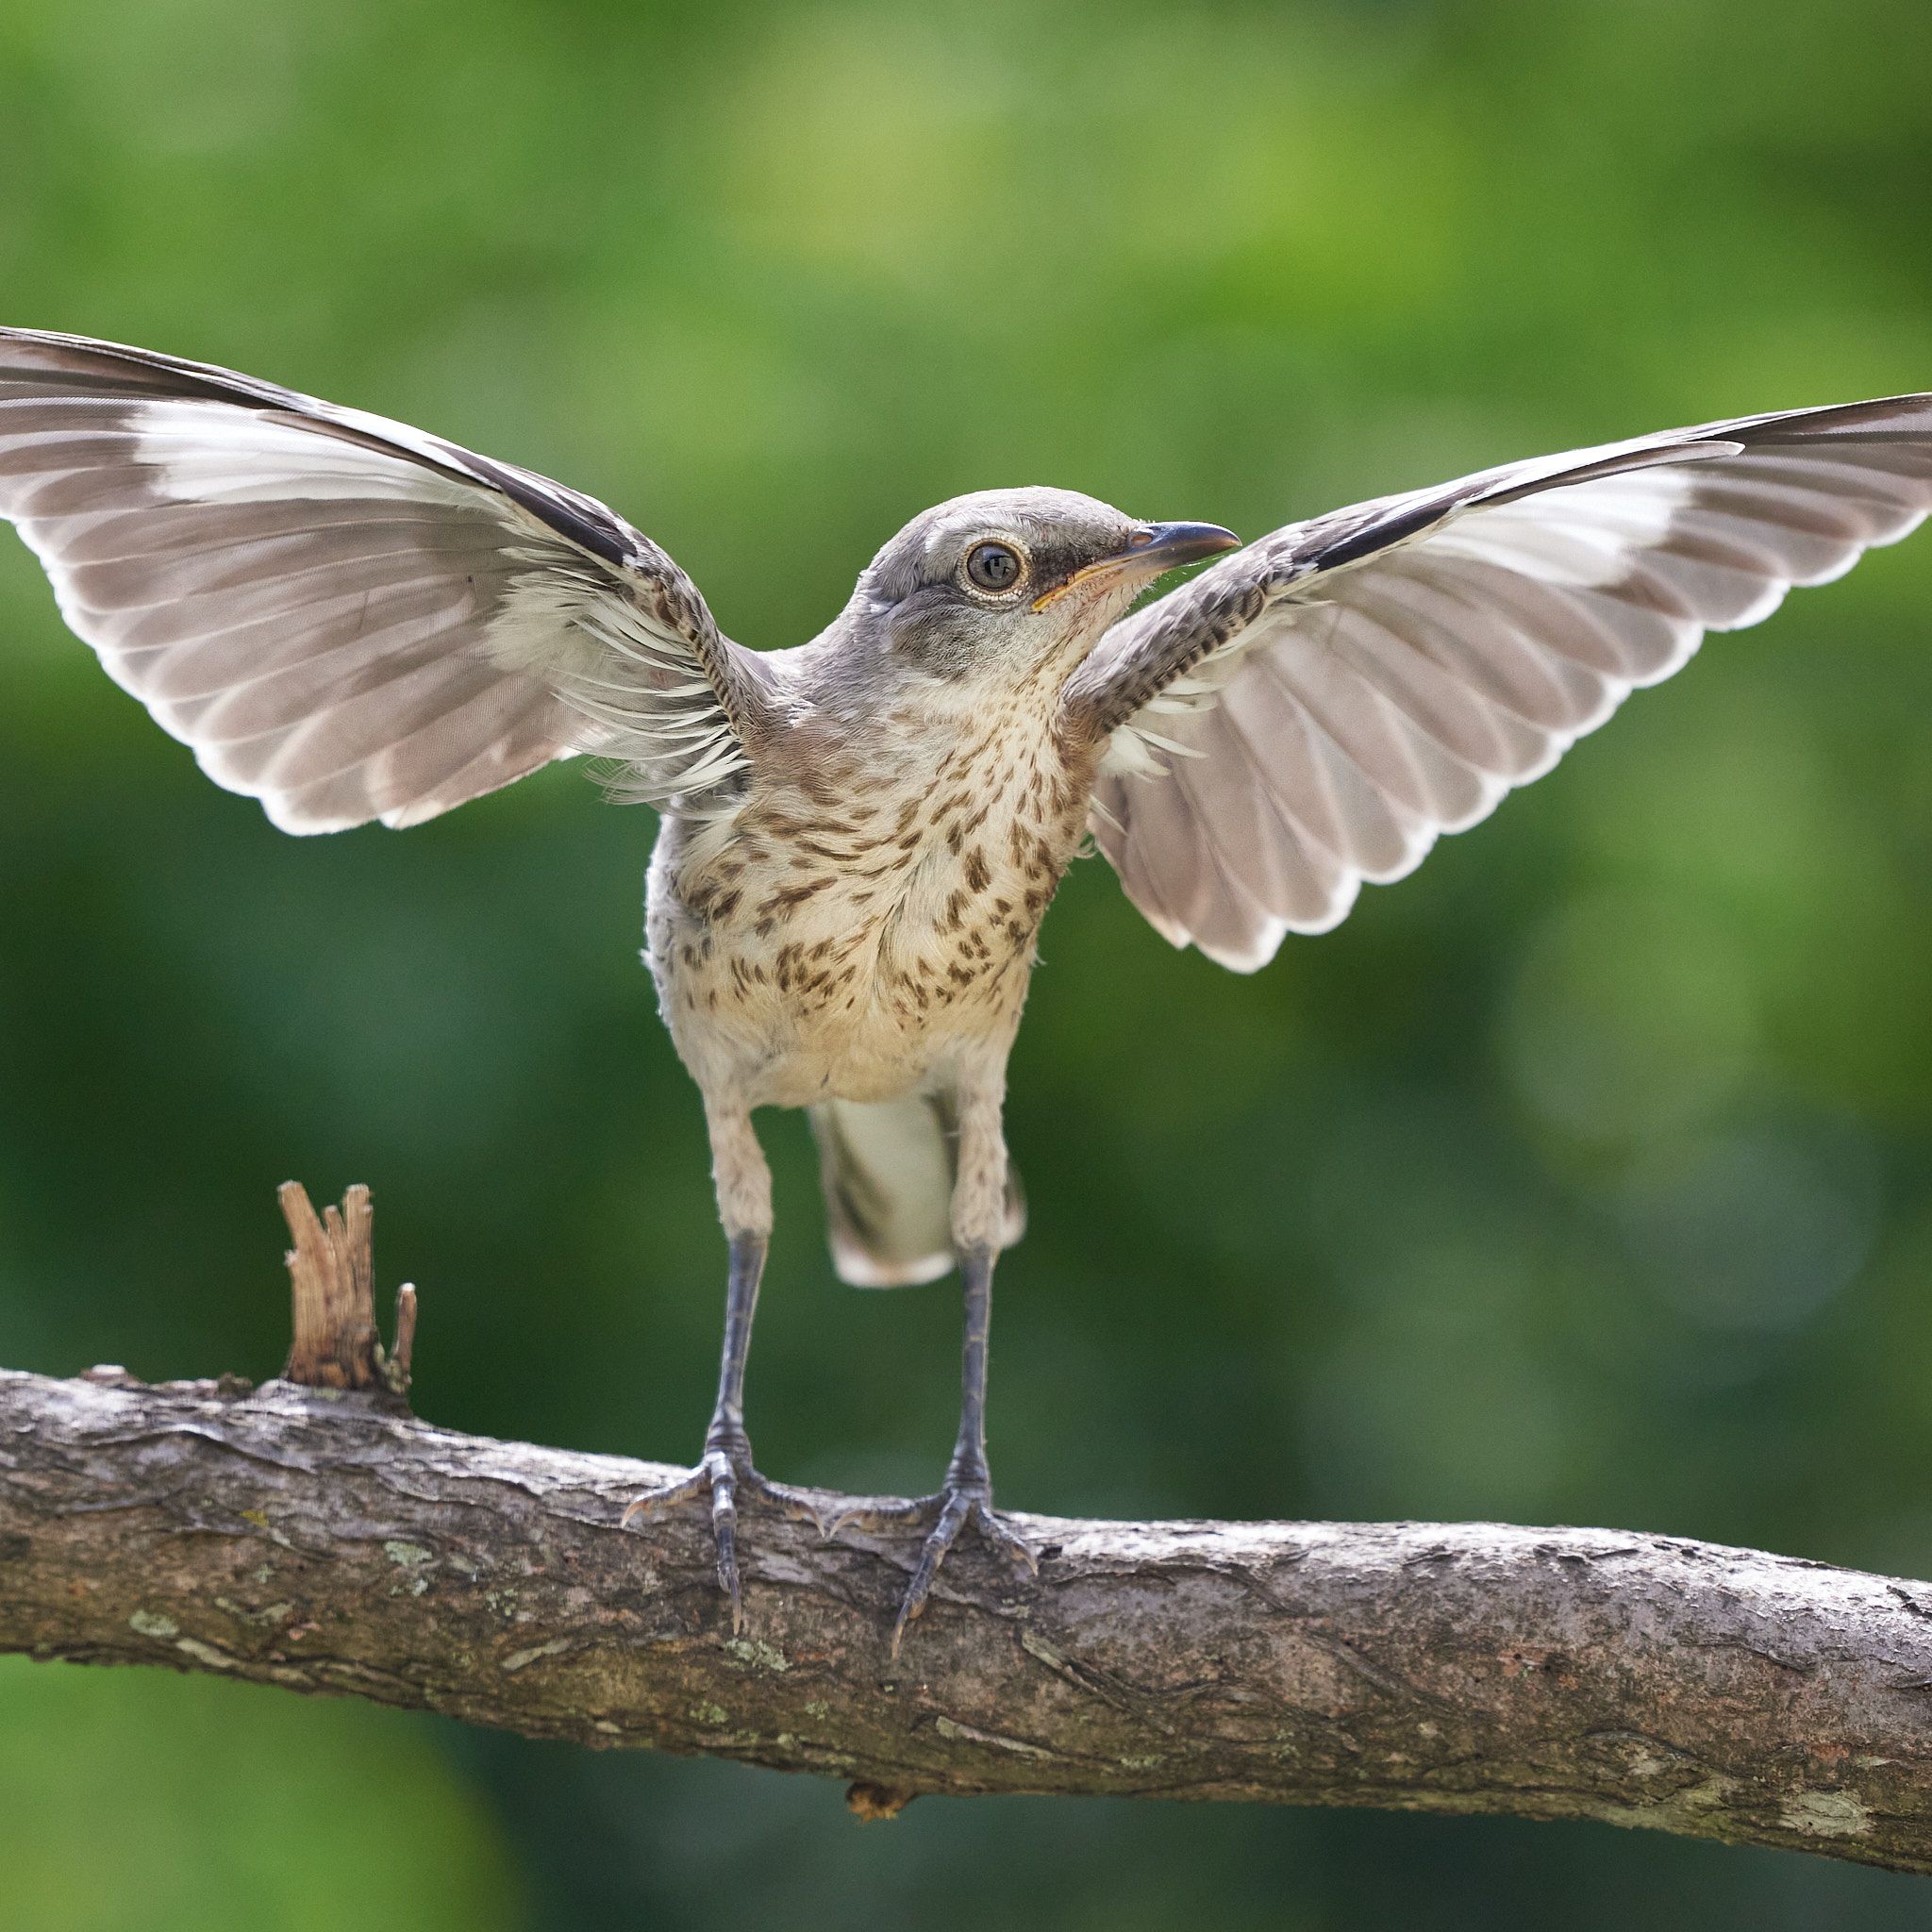 This juvenile Northern Mockingbird is practicing its wing flash. According to the Audubon Society, “The white patches on a Northern Mockingbird’s wings and outer tail feathers serve dual purposes: The birds often show off these plumes during mating rituals, and they also flash them when defending their territory from potential predators like hawks and snakes.”